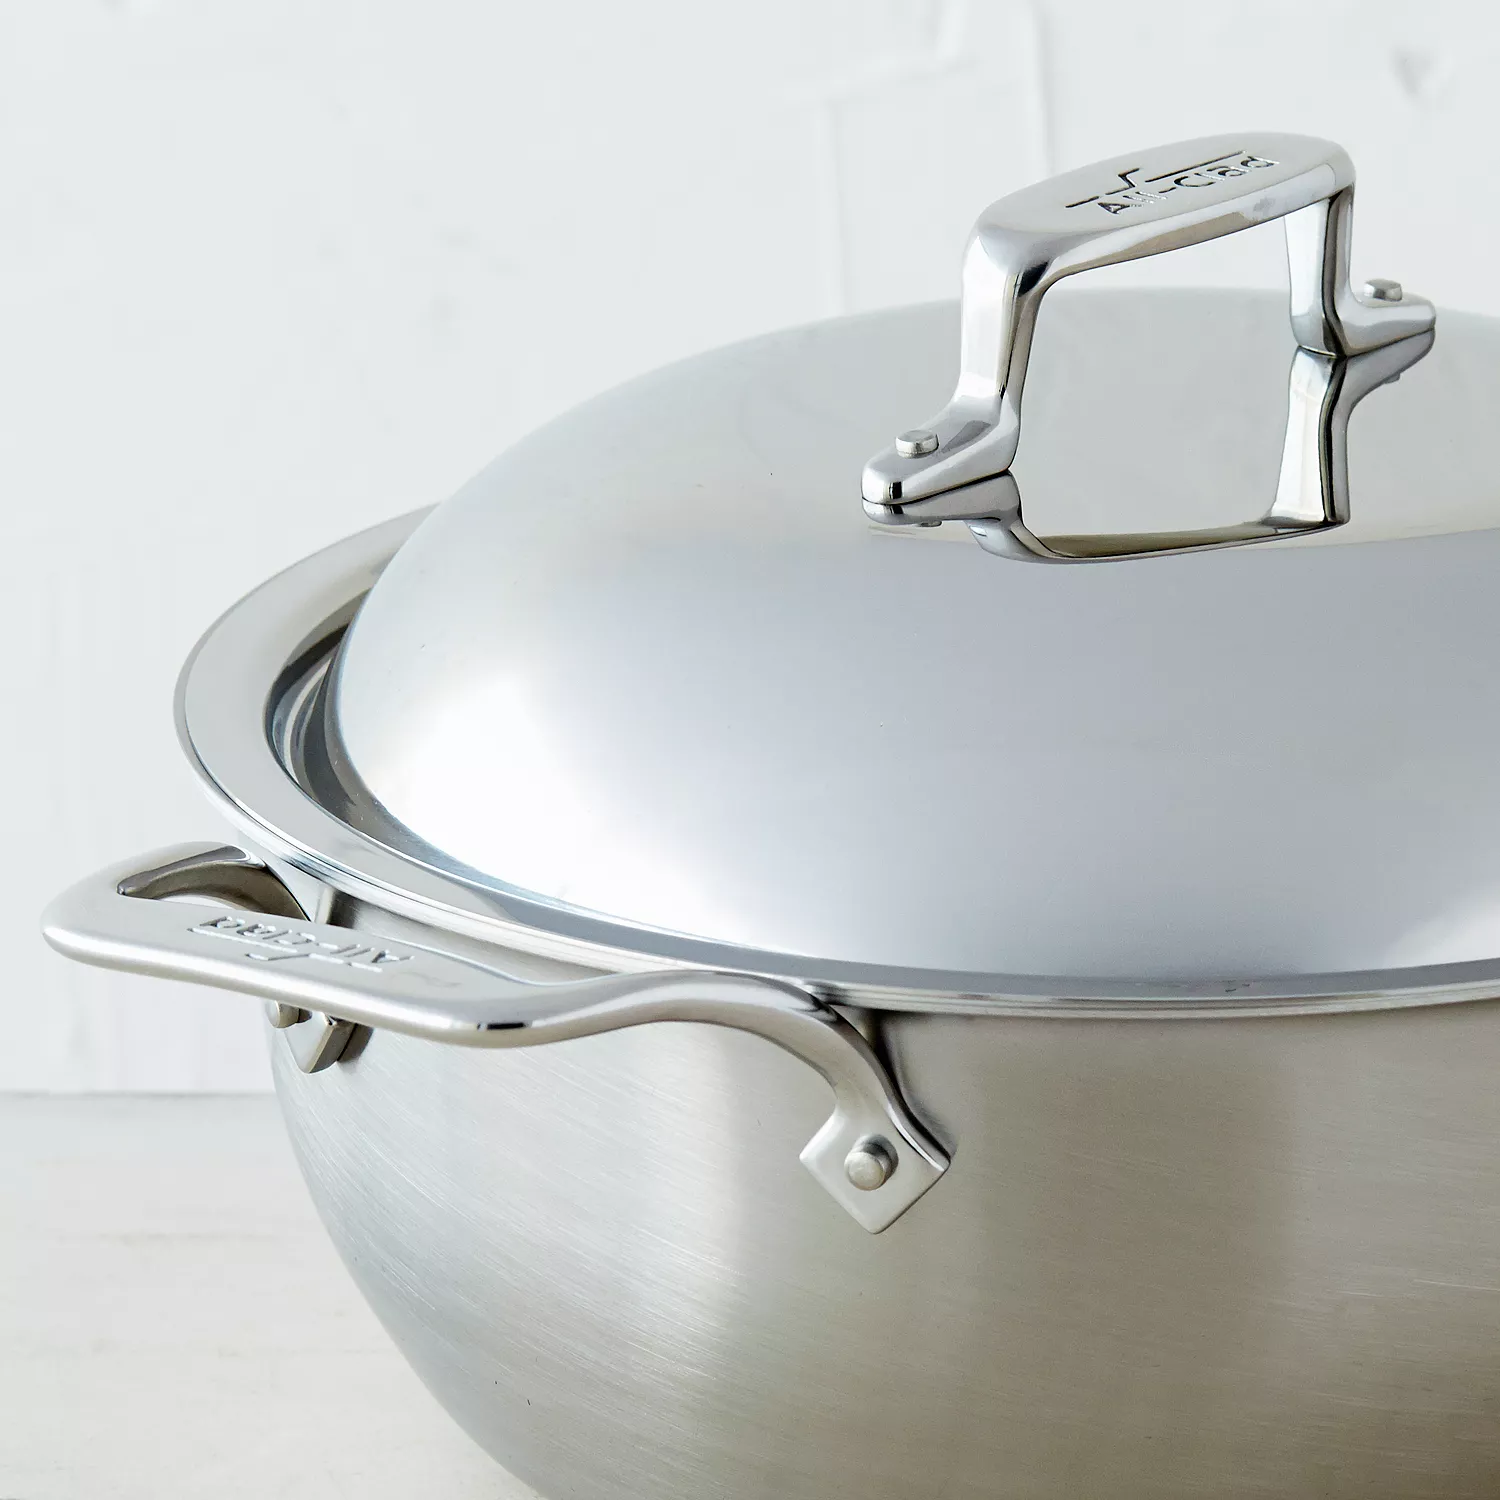 All-Clad D5 Brushed Stainless Steel Stockpot | Sur La Table